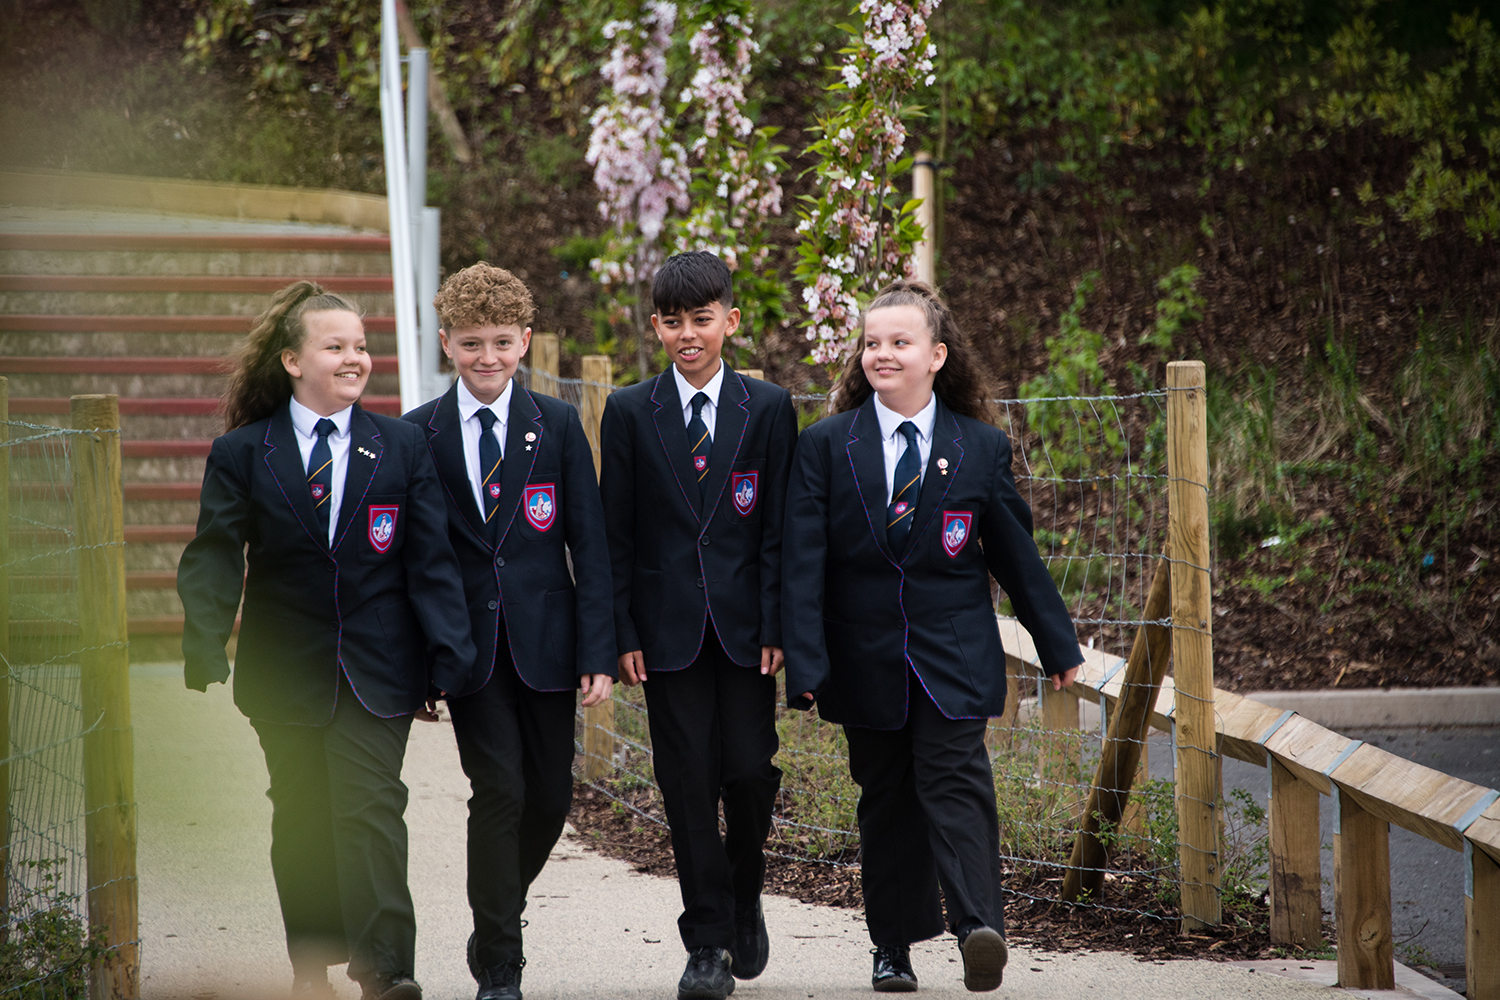 Four students smiling walking through school grounds